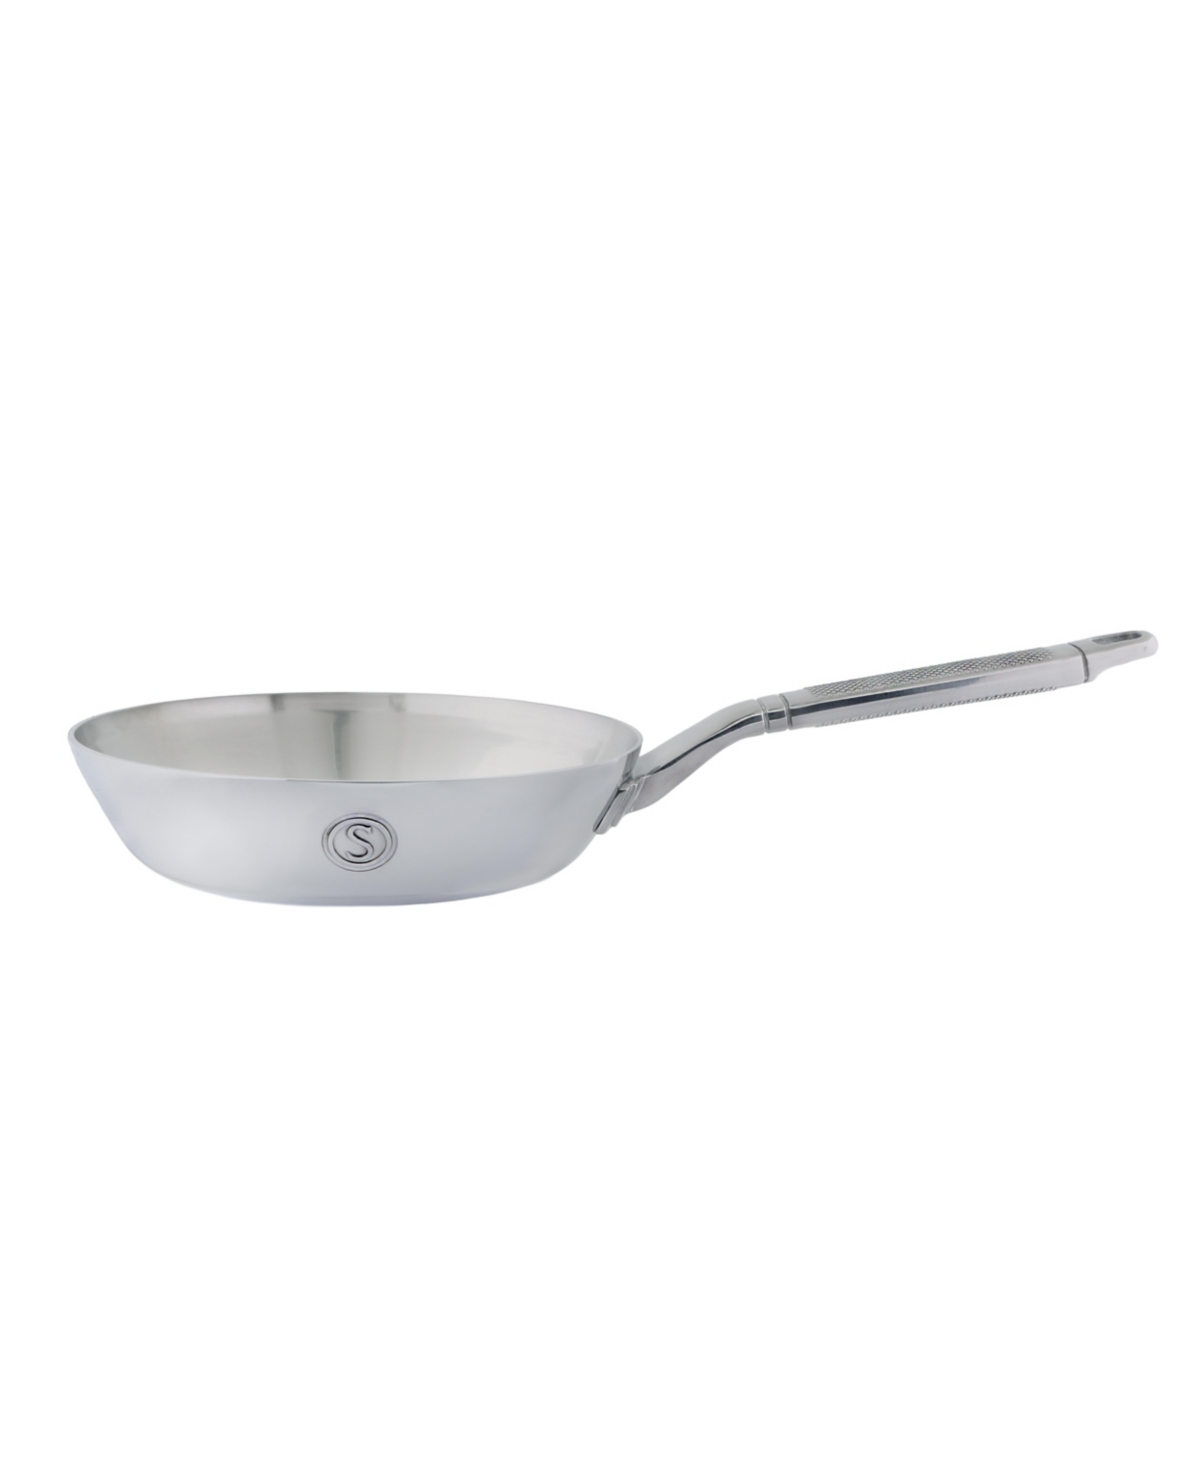 Saveur Selects Voyage Series Tri-ply Stainless Steel 8" Fry Pan In Silver